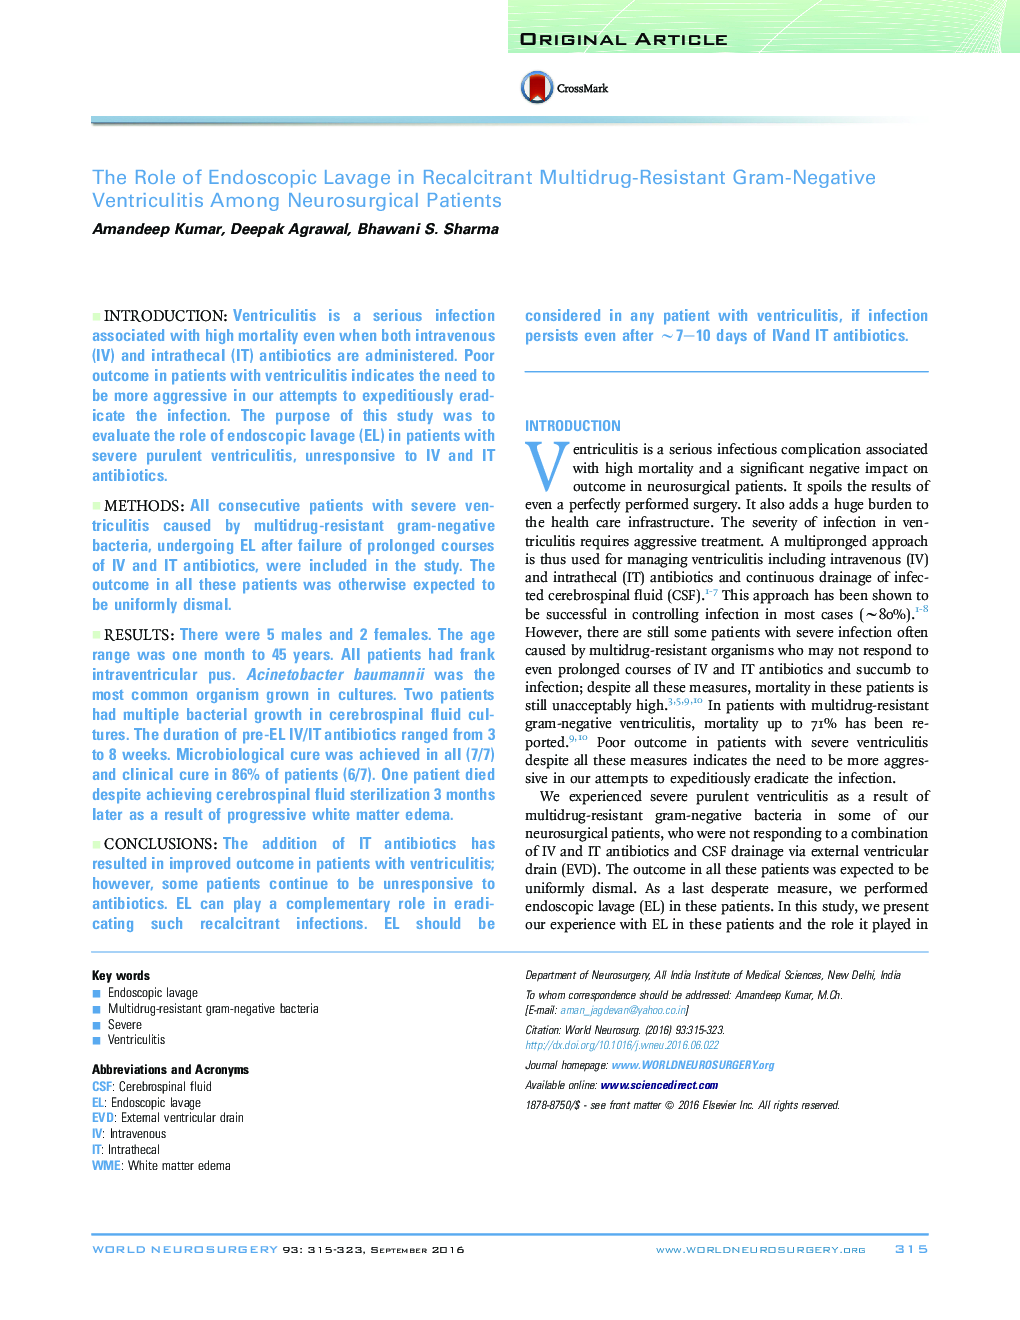 The Role of Endoscopic Lavage in Recalcitrant Multidrug-Resistant Gram-Negative Ventriculitis Among Neurosurgical Patients